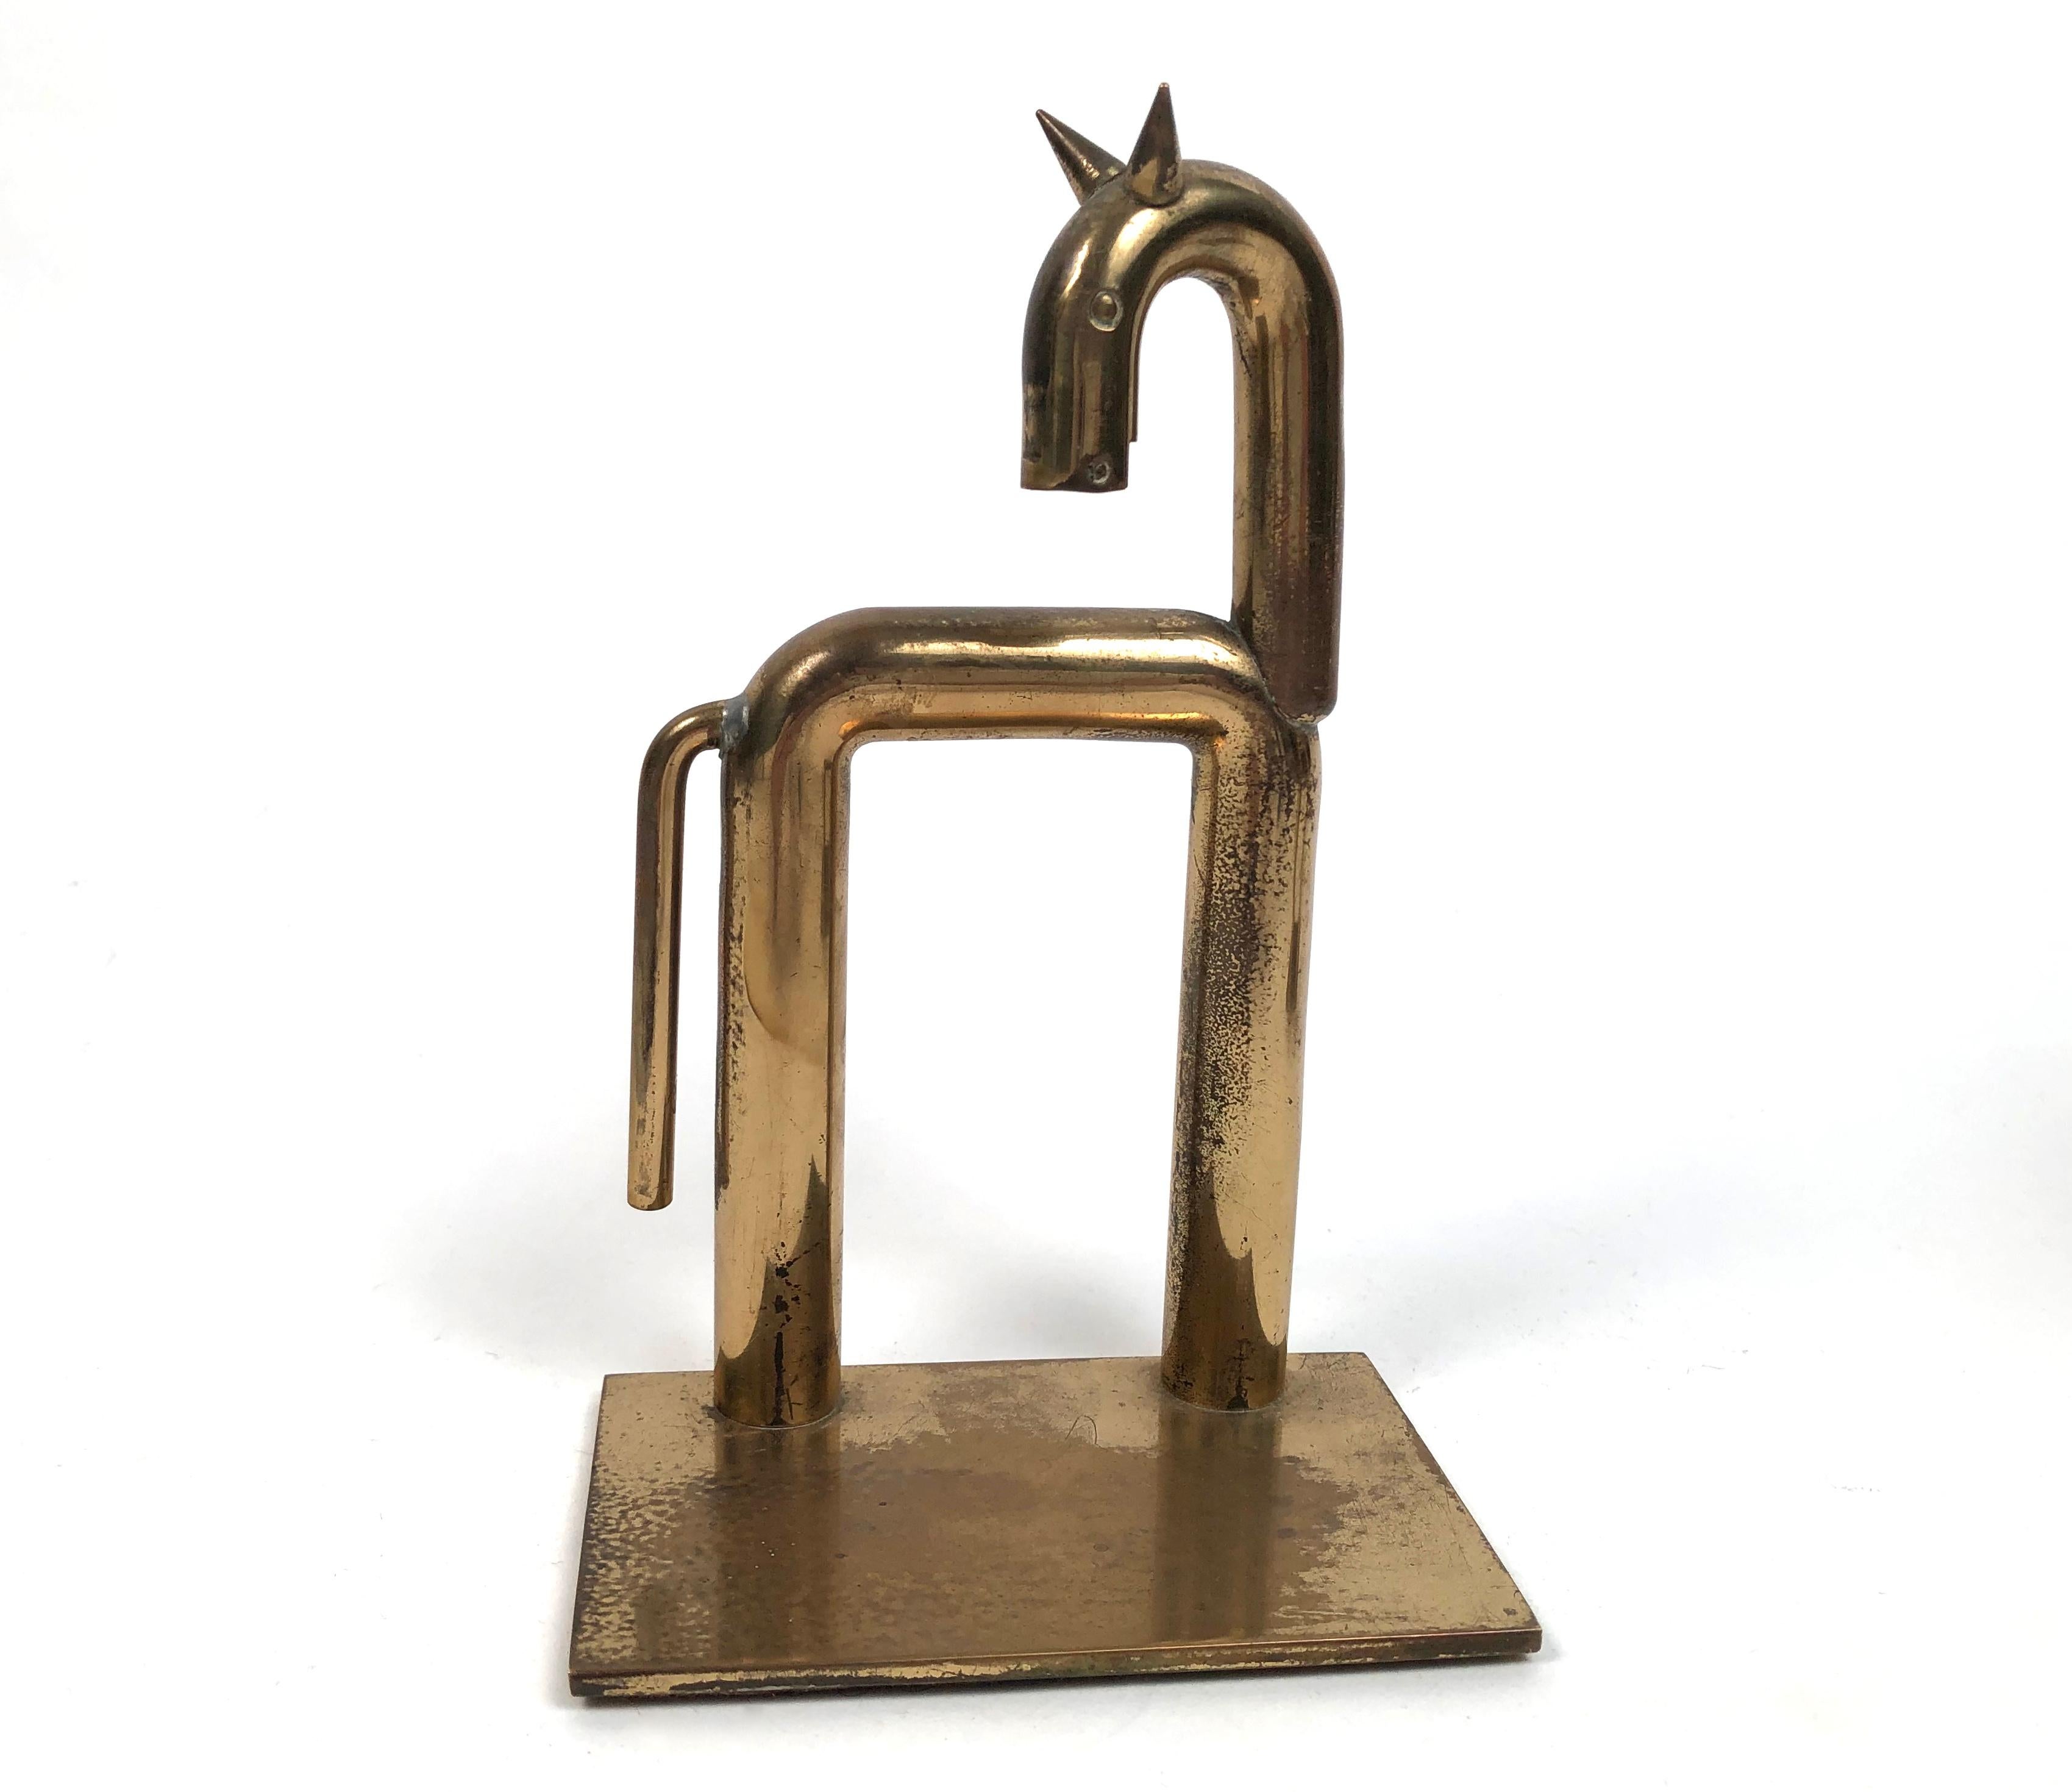 A pair of modernist brass stylized horse bookends, designed by Walter von Nessen (1889-1943) for the Chase Brass and Copper Company, Waterbury, Connecticut, circa 1931. These slick and wonderfully minimalist figural horse book ends look both ancient